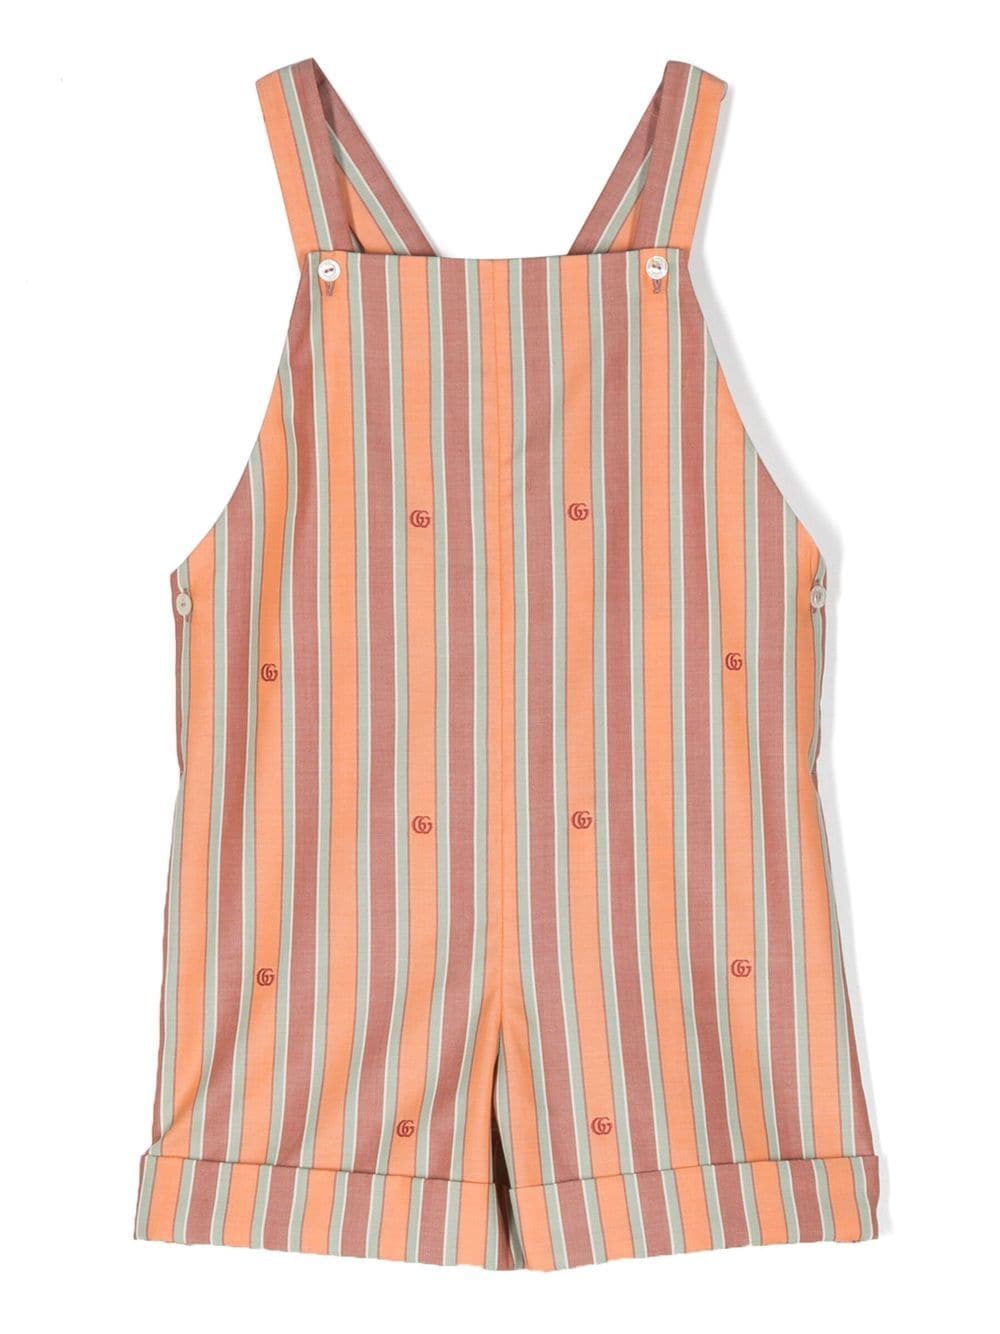 Orange dungarees for baby girls with logo